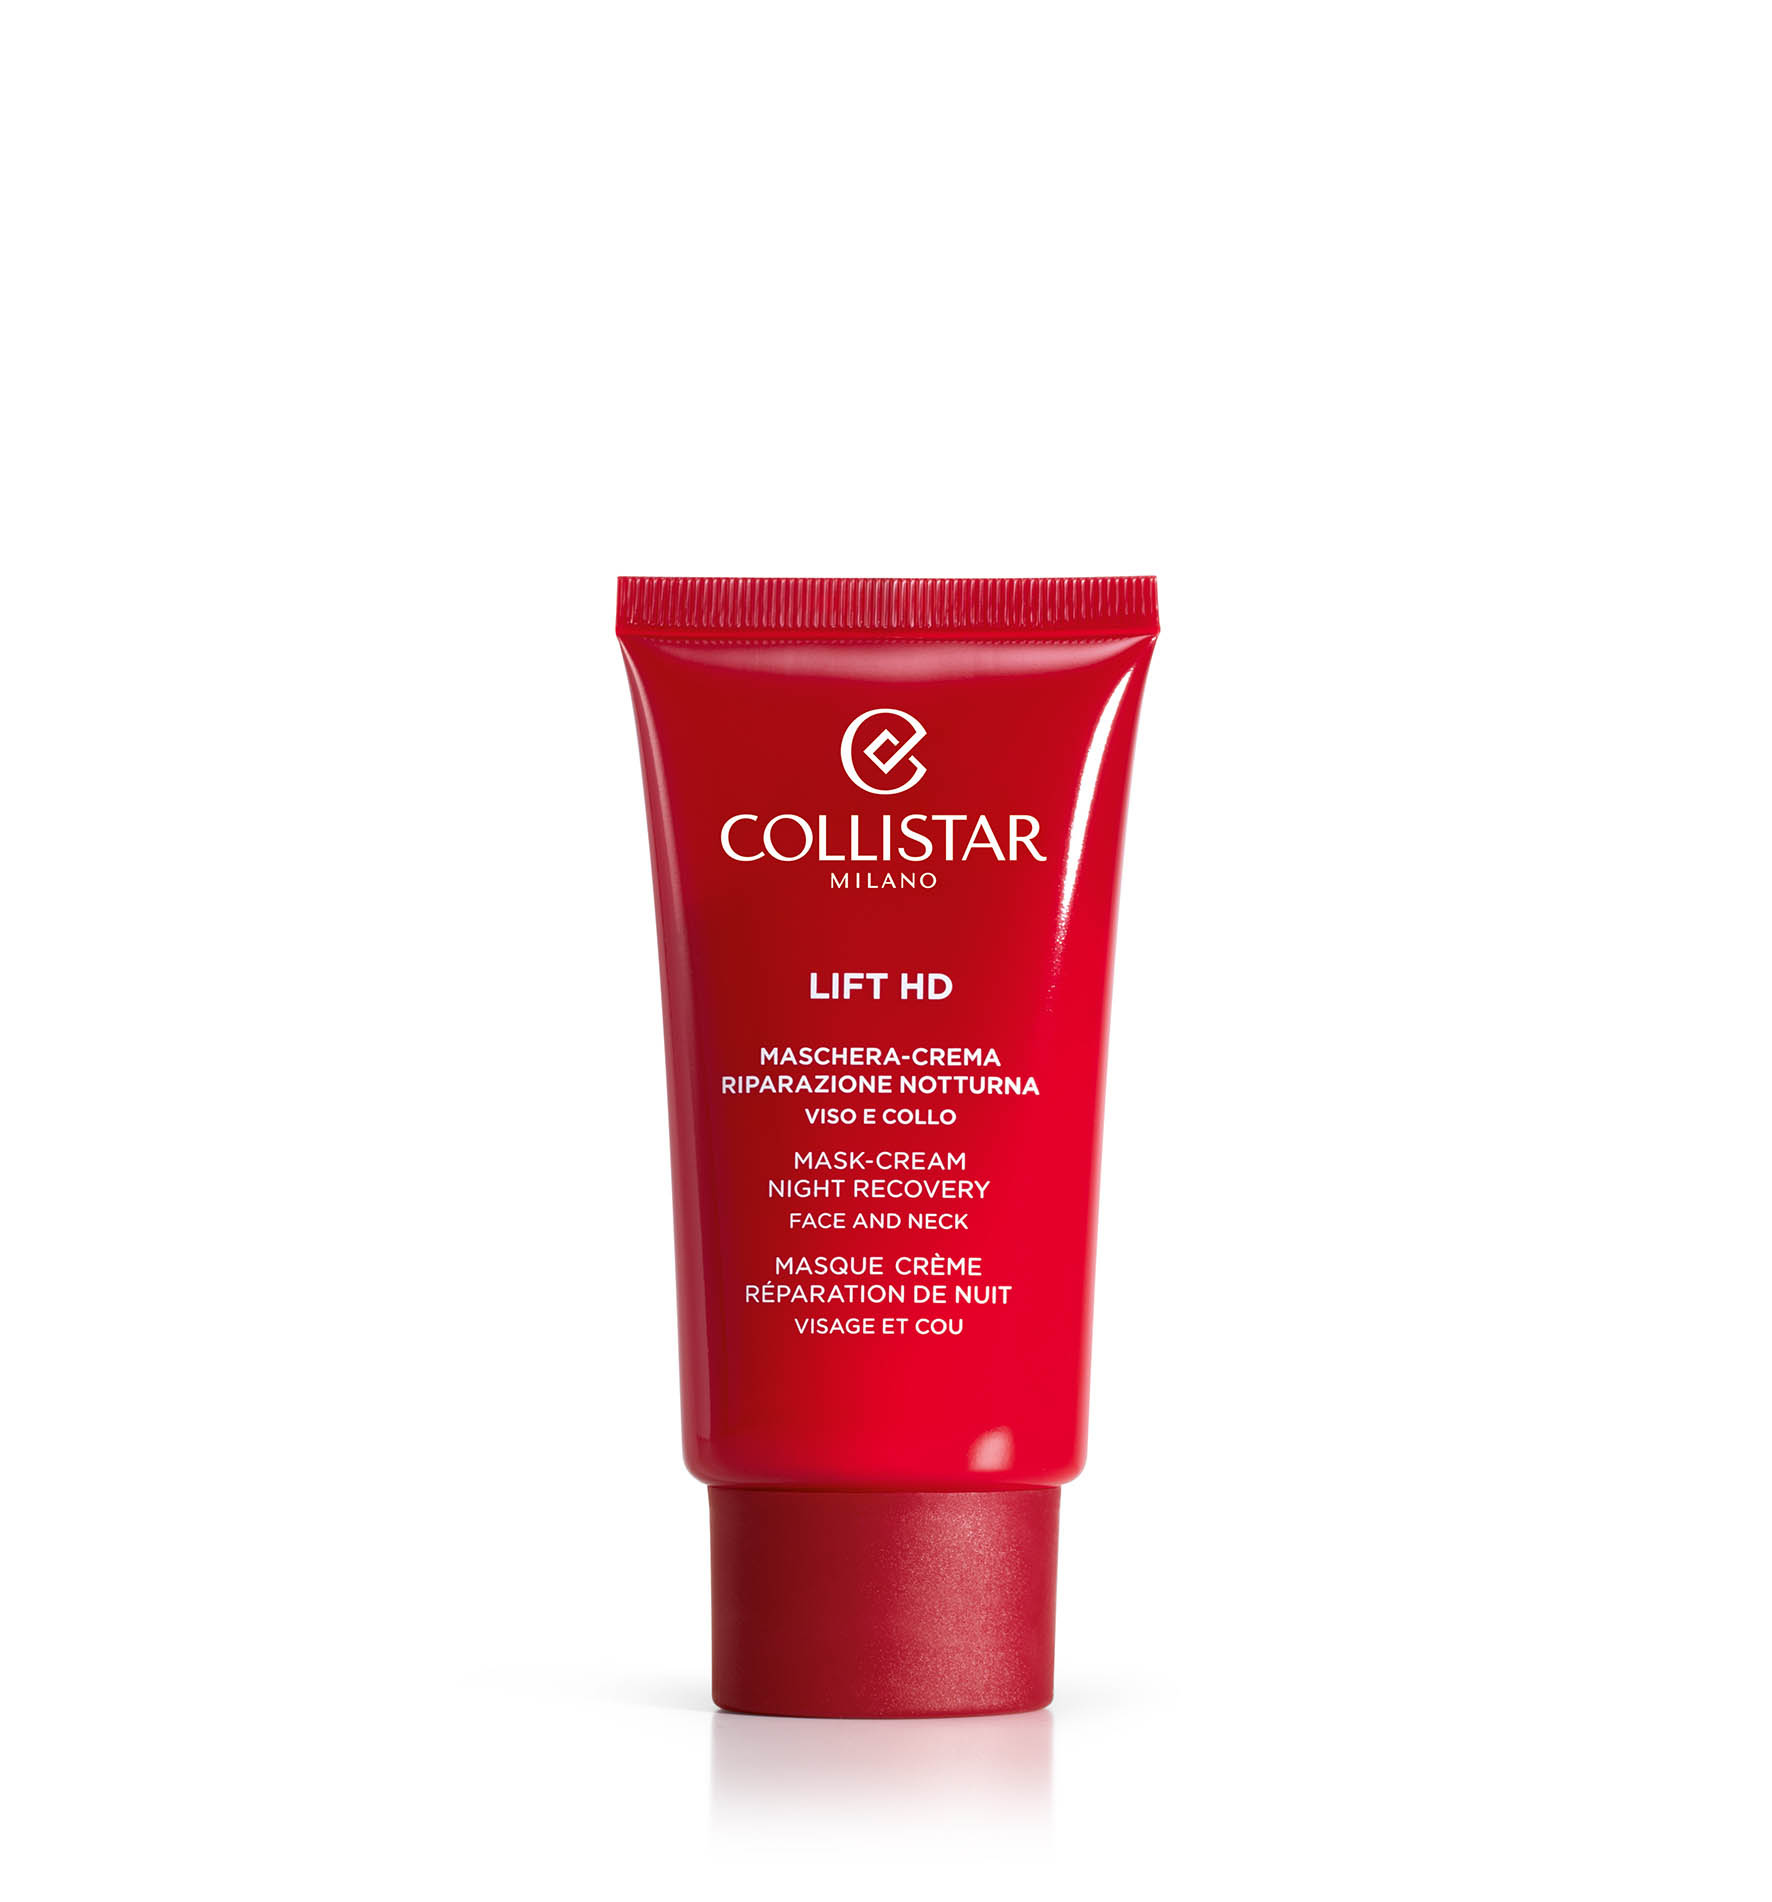 MASK-CREAM NIGHT RECOVERY FACE AND NECK - bestsellers | Collistar - Shop Online Ufficiale